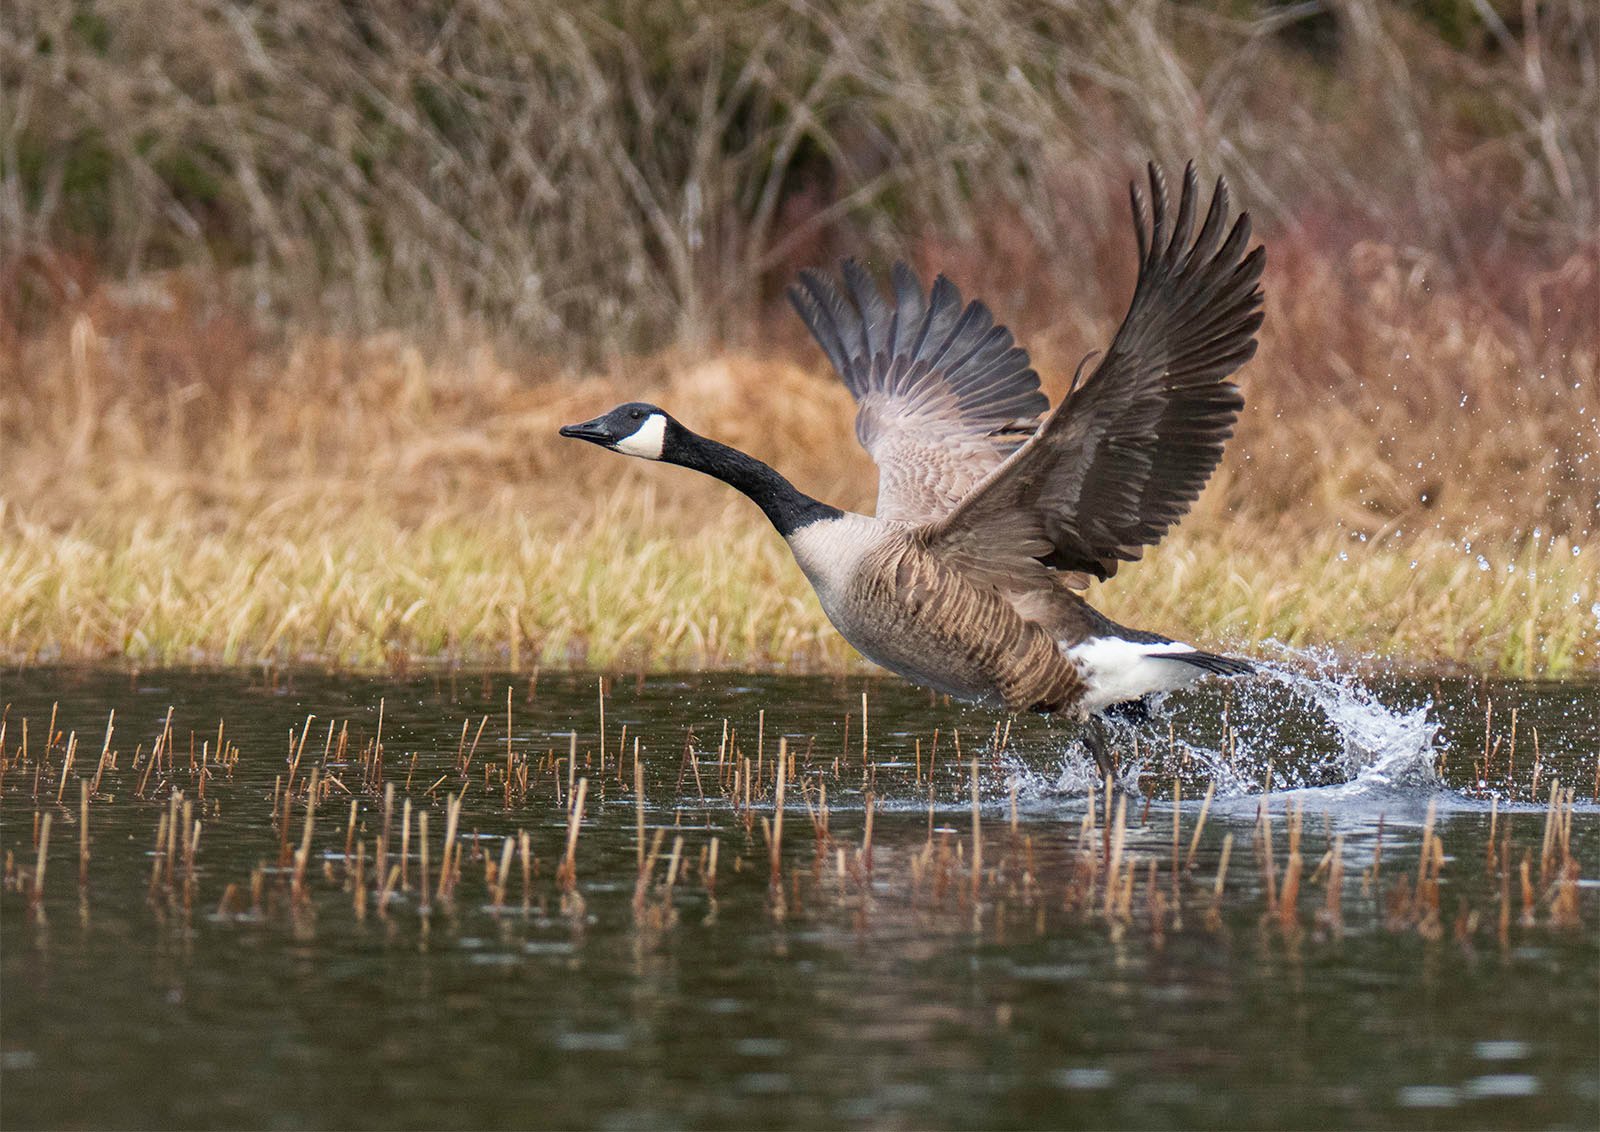 A Canada goose takes off from a pond, wings spread, water droplets splashing, tall dry grass in the background.